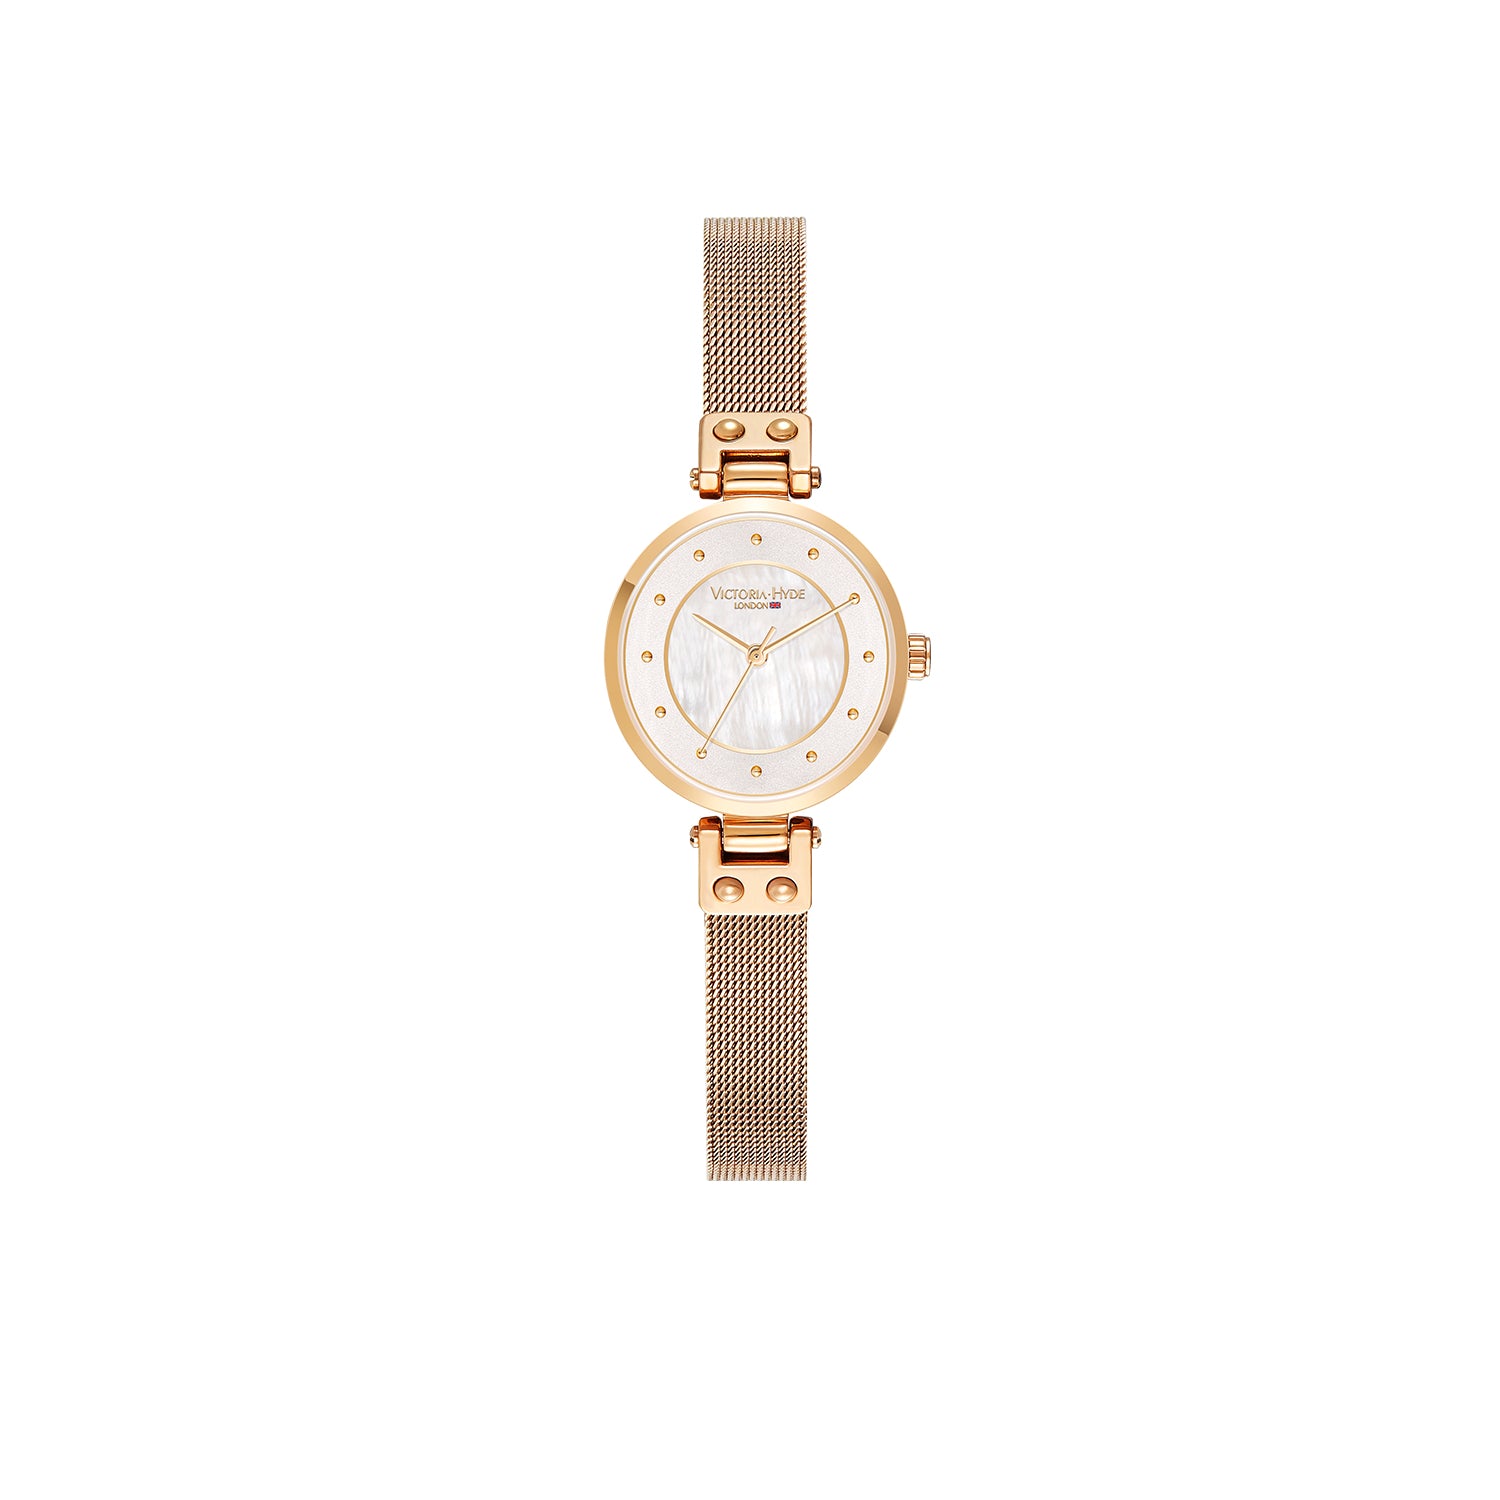 Watch Princess Charlotte in Rosegold